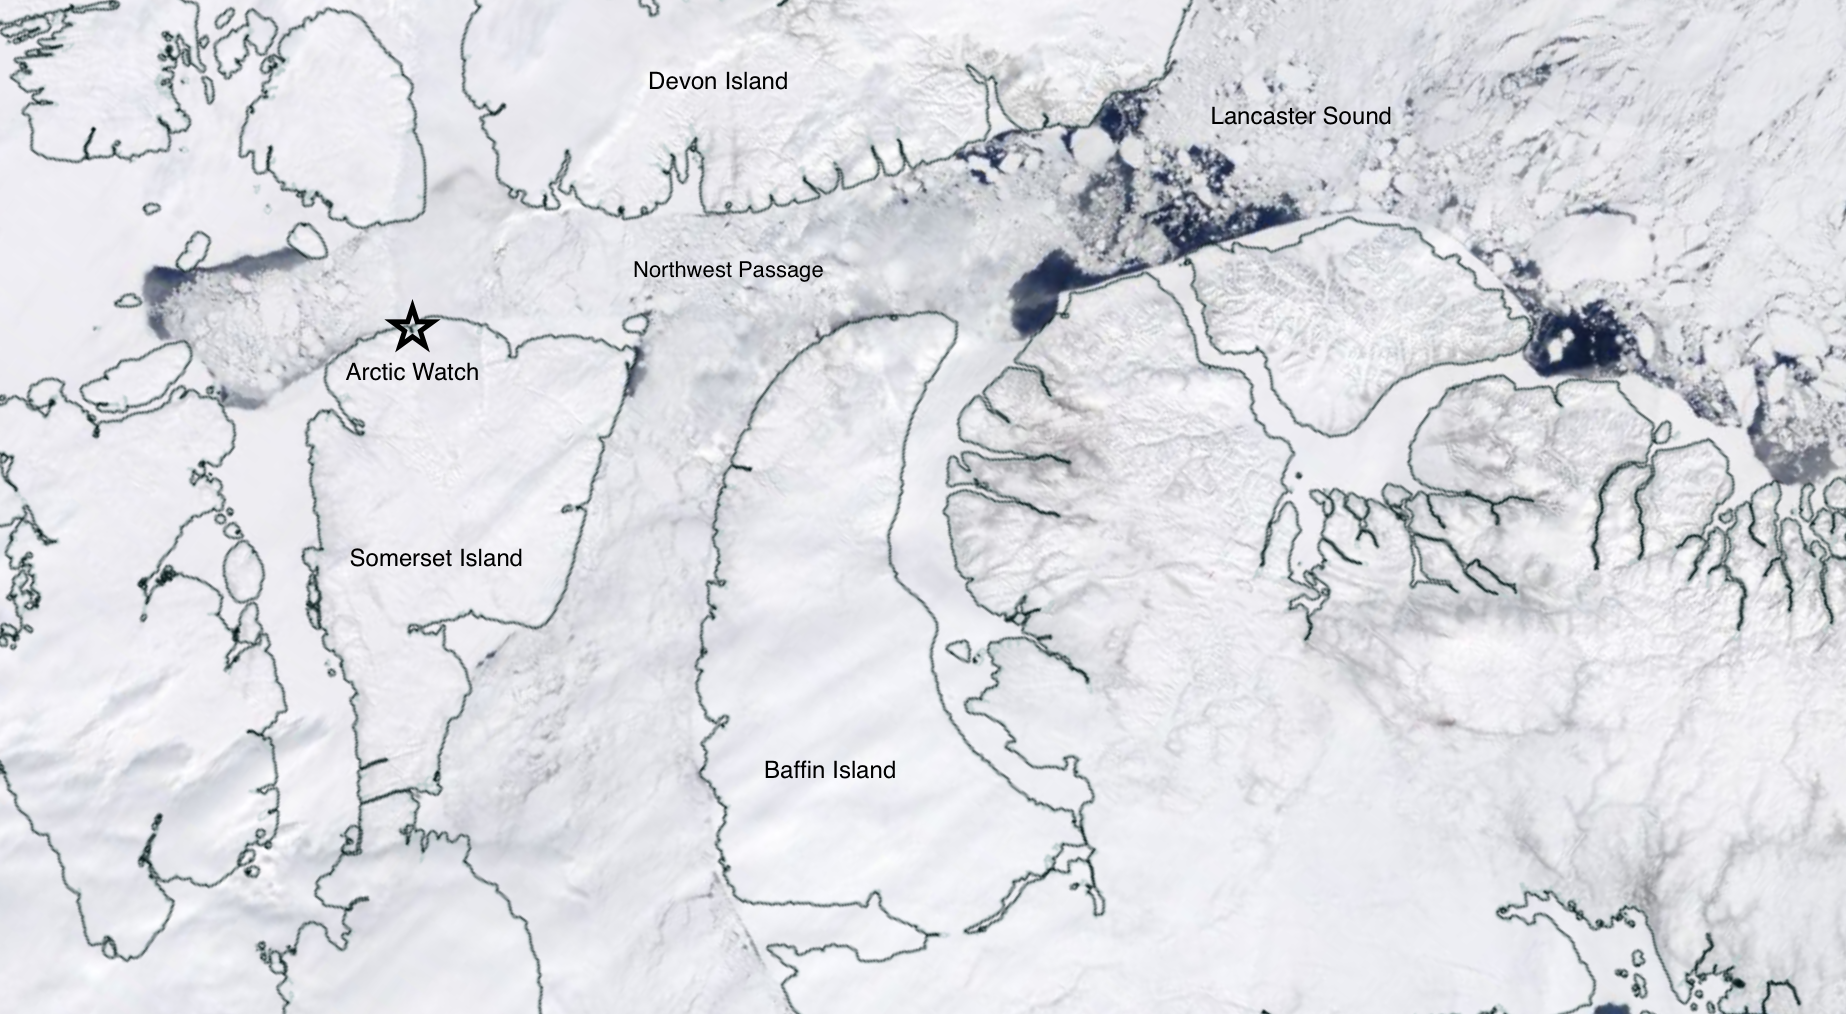 Sea Ice Coverage of the Northwest Passage & Arctic Watch, May 4th 2021